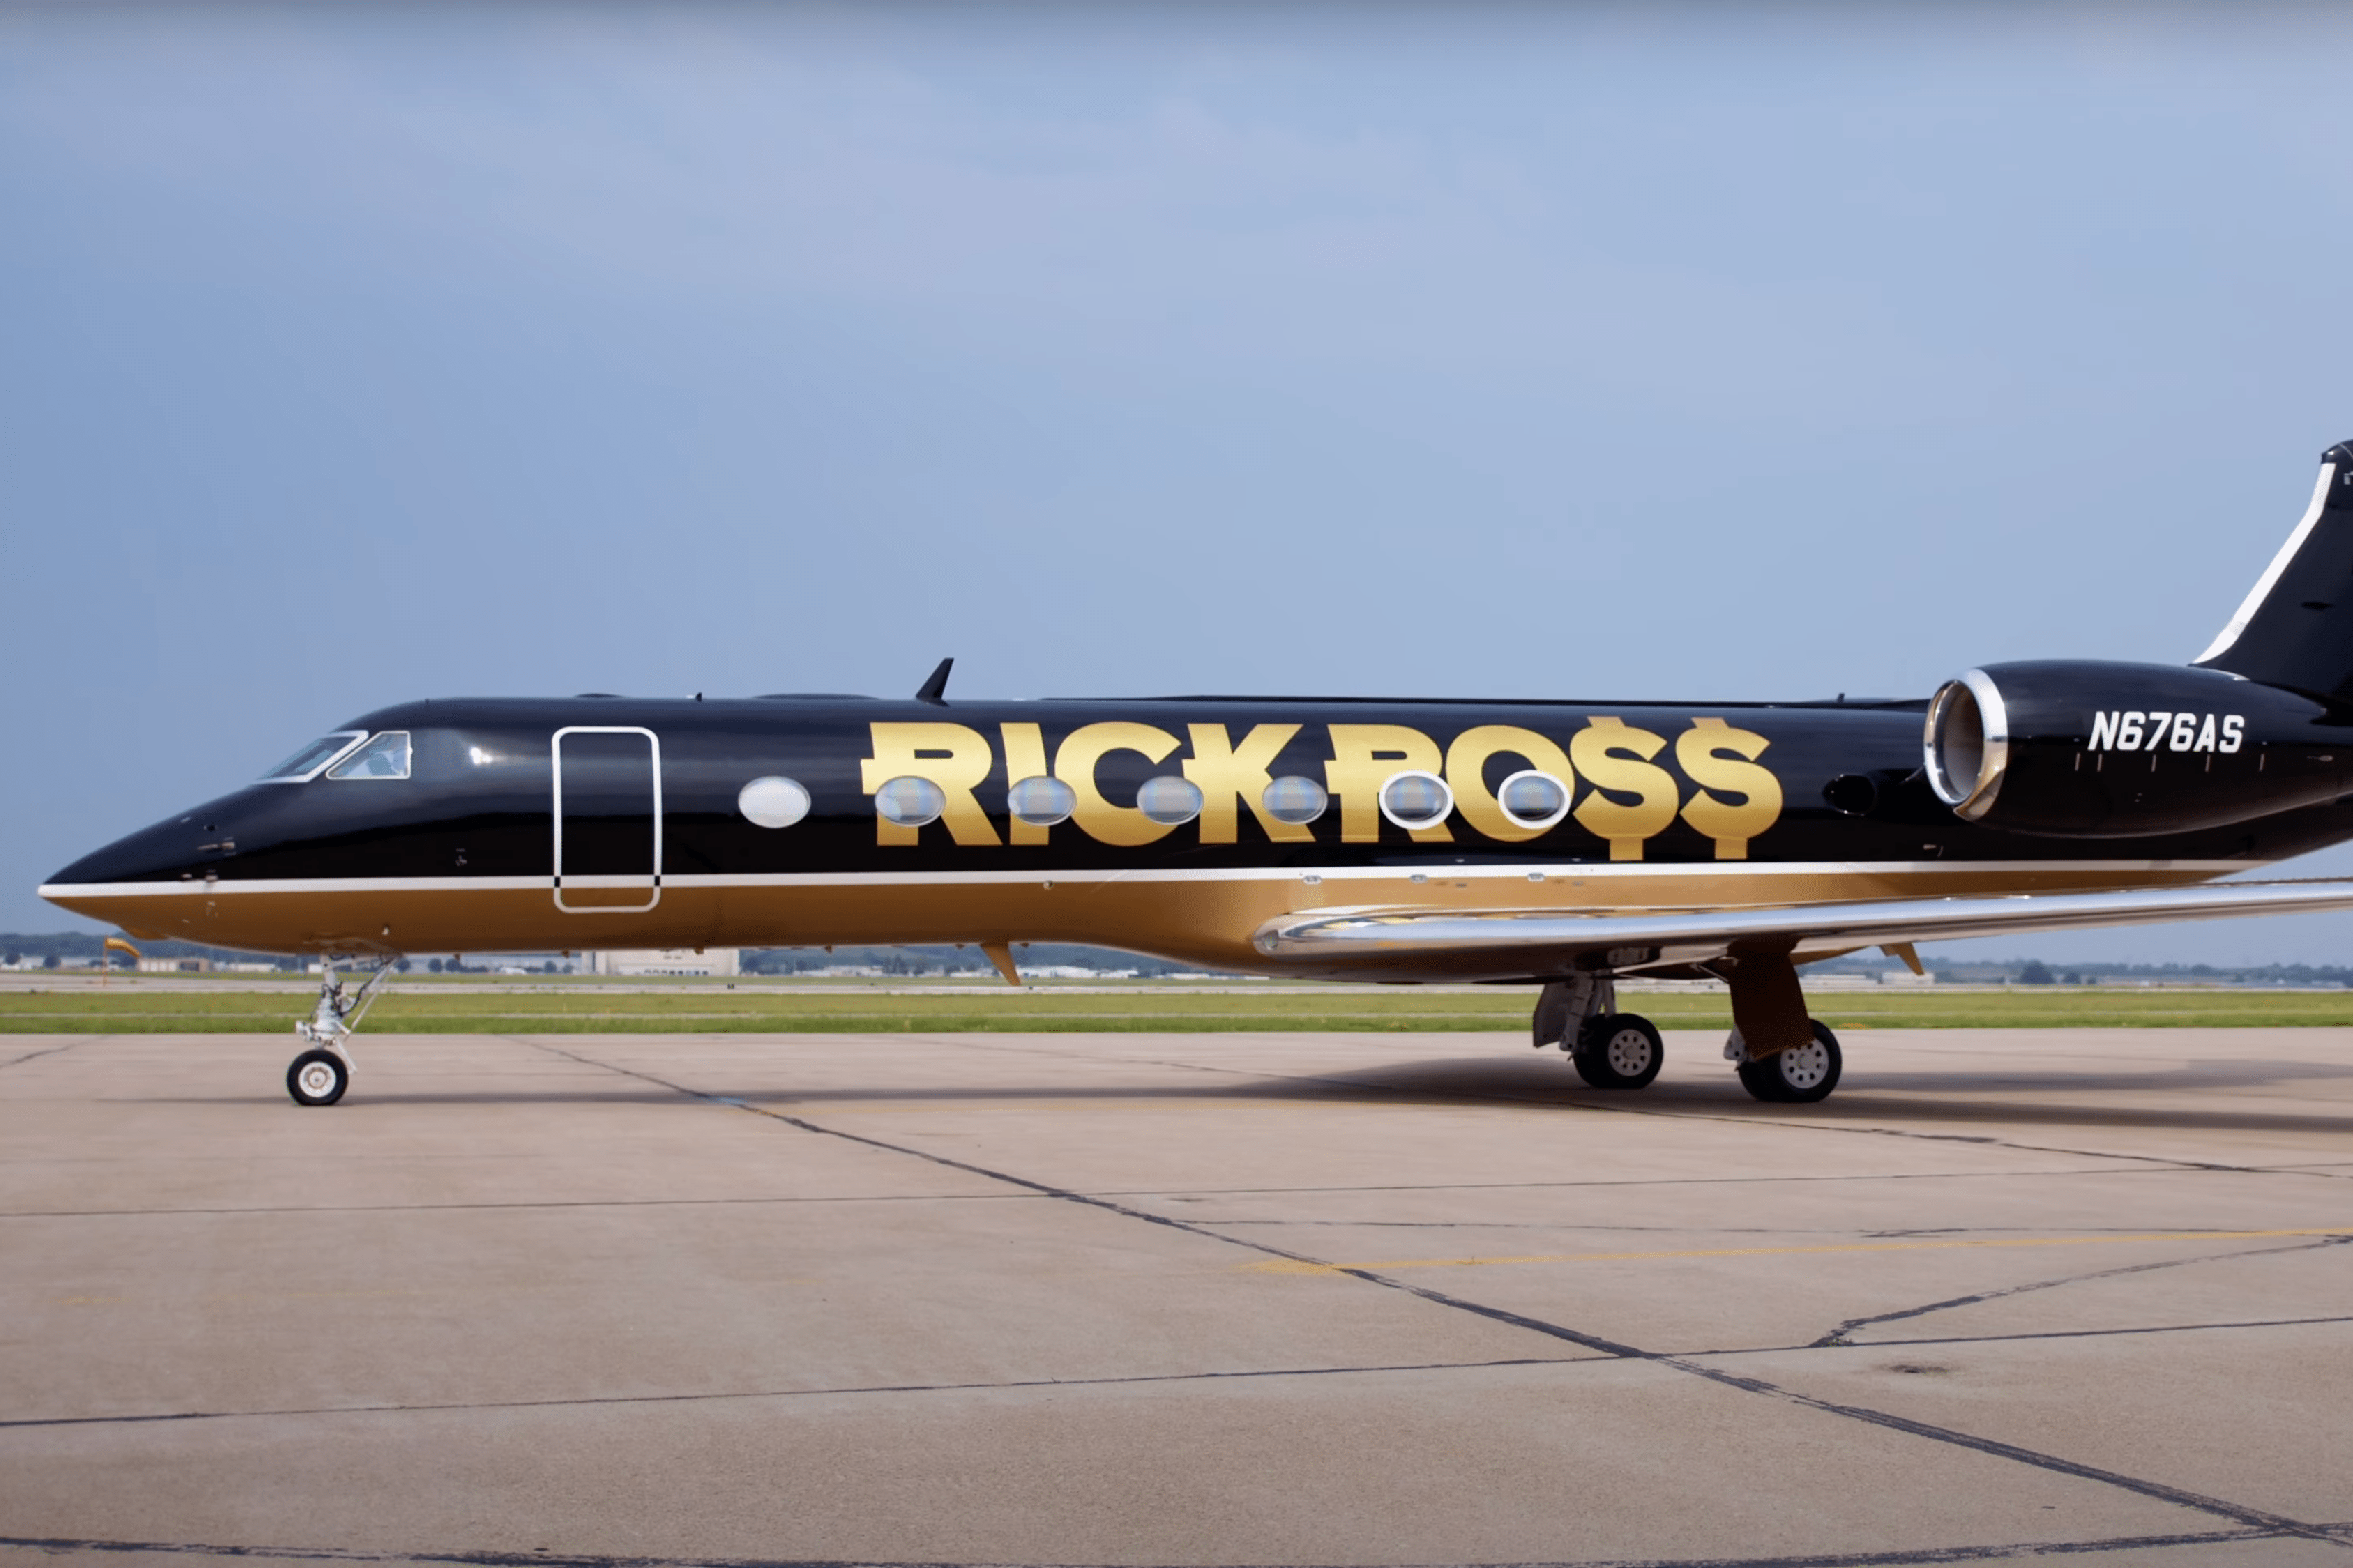 Rick Ross's private jet with a very bold livery.